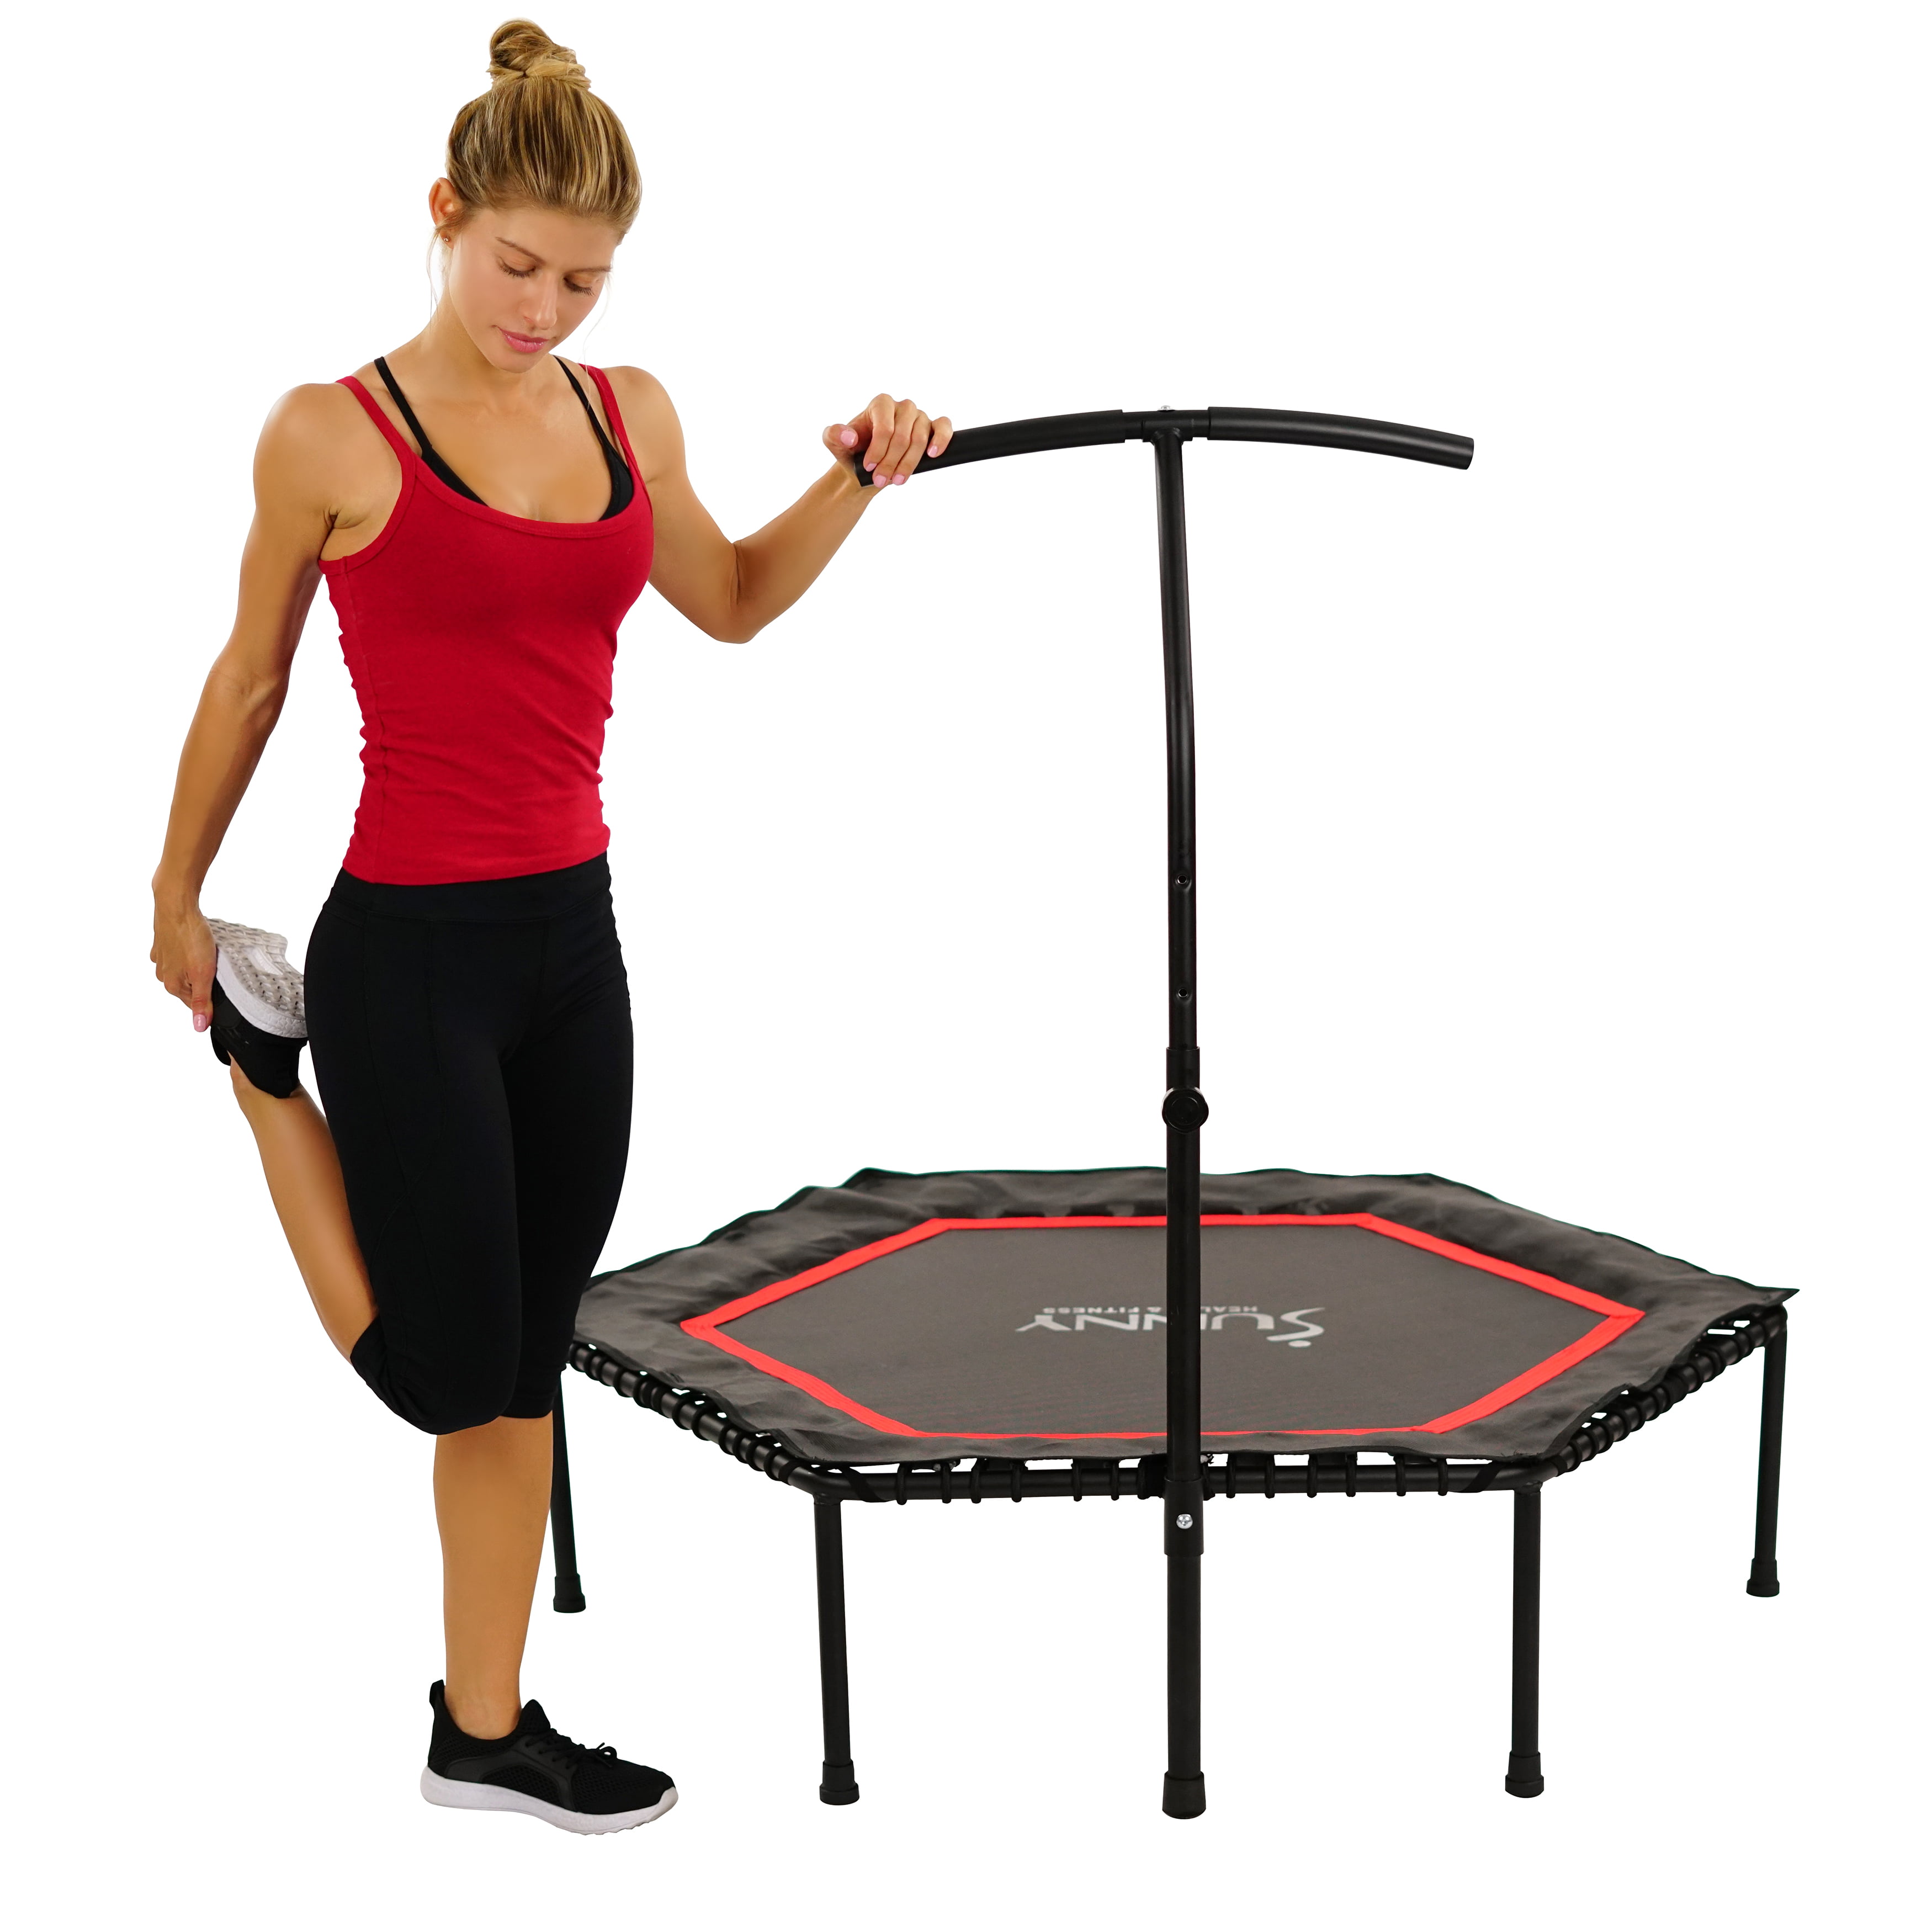 Exercise with Adjustable Sunny Indoor Health & Rebounder Fitness Mini NO. Fitness Trampoline 079 Handlebar,